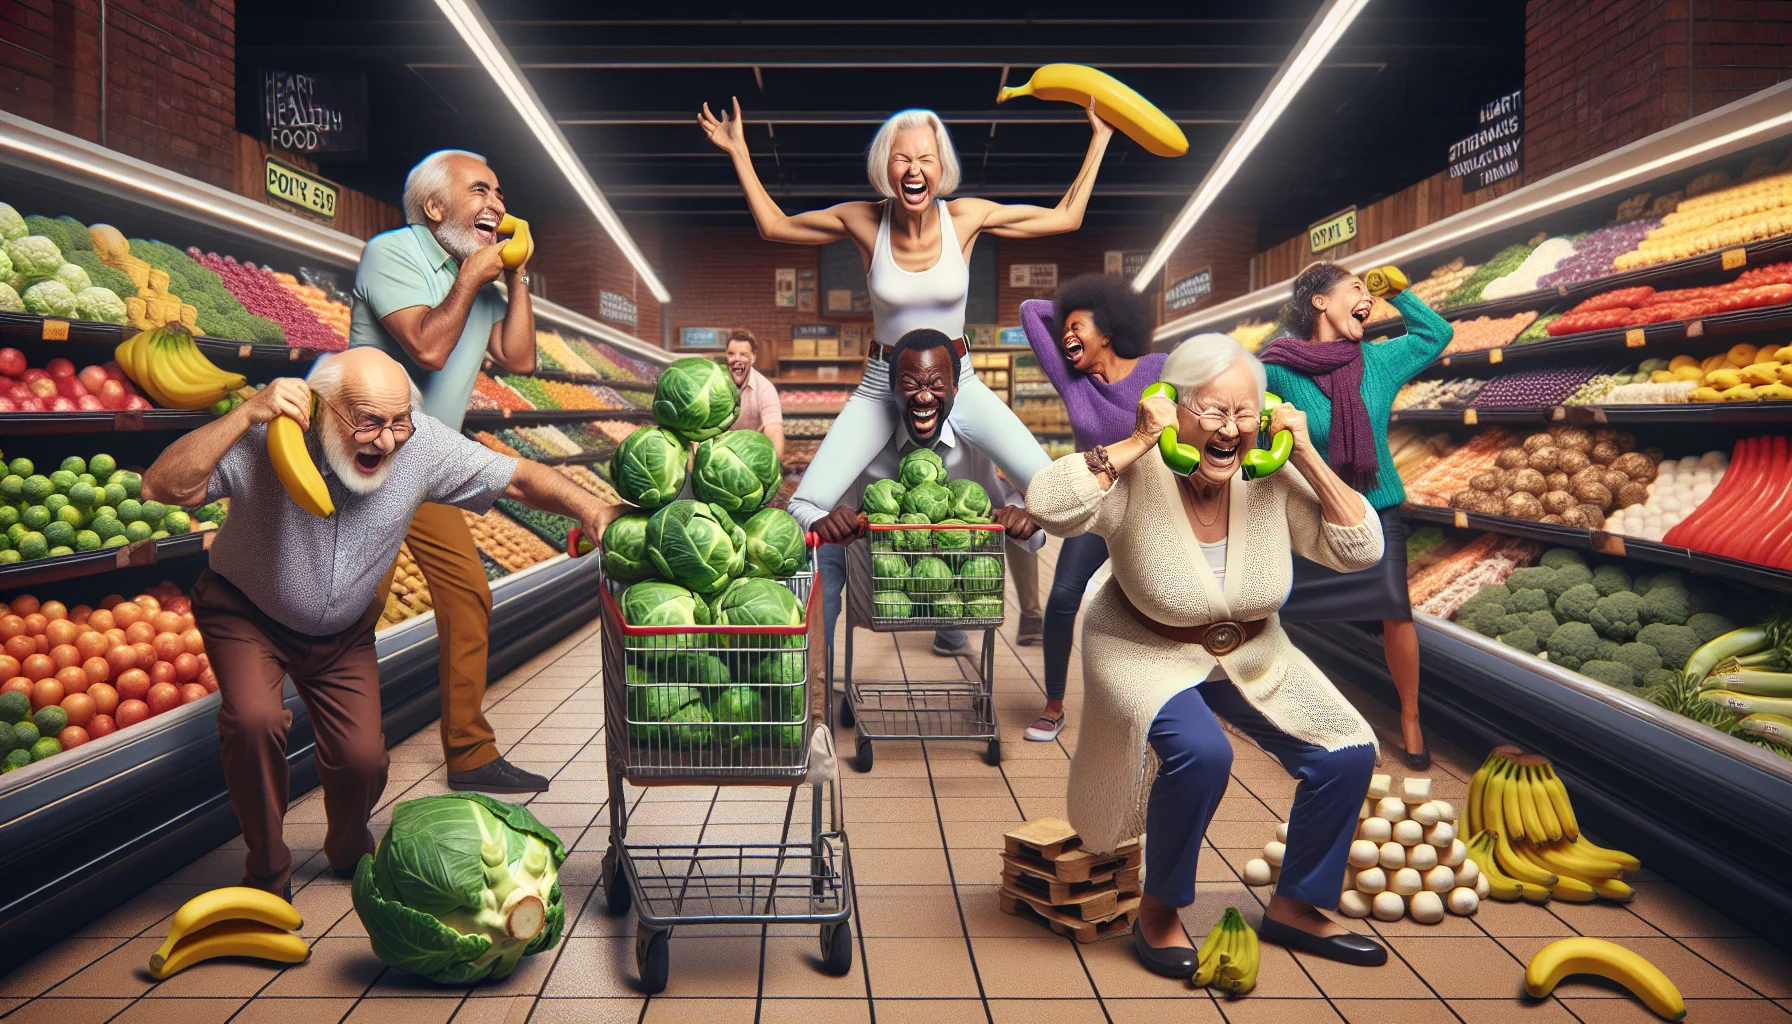 Generate a humorous, hyper-realistic scene set at a heart-healthy food market. Picture a diverse group of lively elderly individuals participating in playful antics. There's a Caucasian woman joyfully comparing two giant brussel sprouts as if they're weights, a South Asian man frantically chasing a rogue zucchini wheeling down an aisle, and a Black woman laughing heartily while attempting to balance a pyramid of tofu packs. Add in a Middle-Eastern old man using bananas as a pretend telephone, attracting several amused glances. The scene is rich with vibrant colors of fruits, veggies, and other health foods highlighting the joy in maintaining a healthy diet in old age.